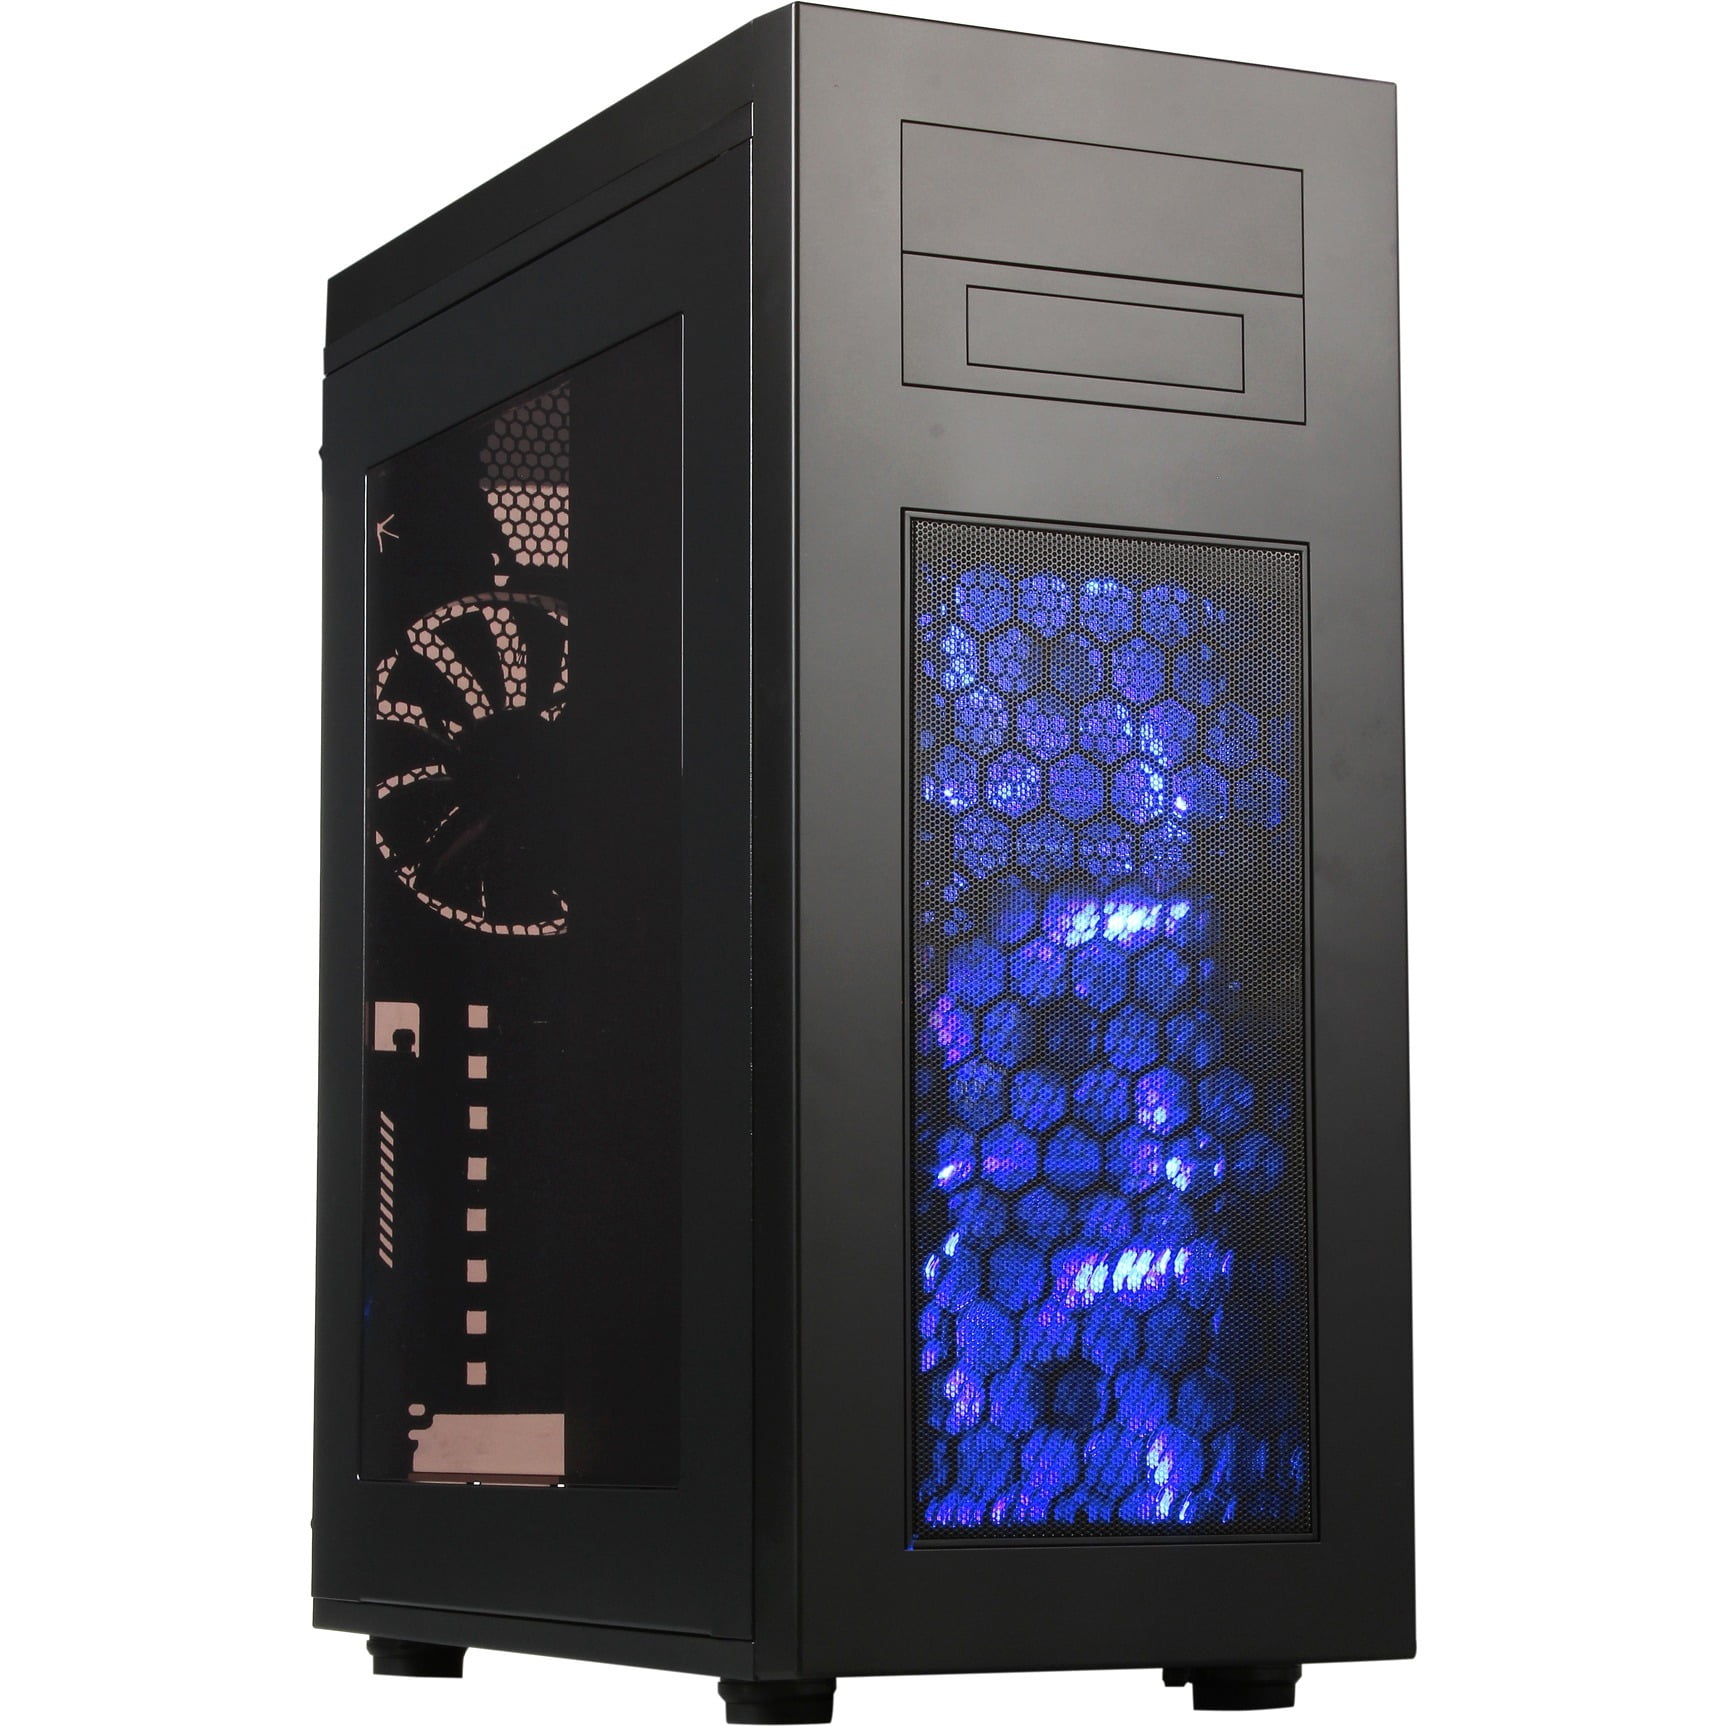 Rise Glow Atx Slim Full Tower Gaming Computer Case With Blue Led Front